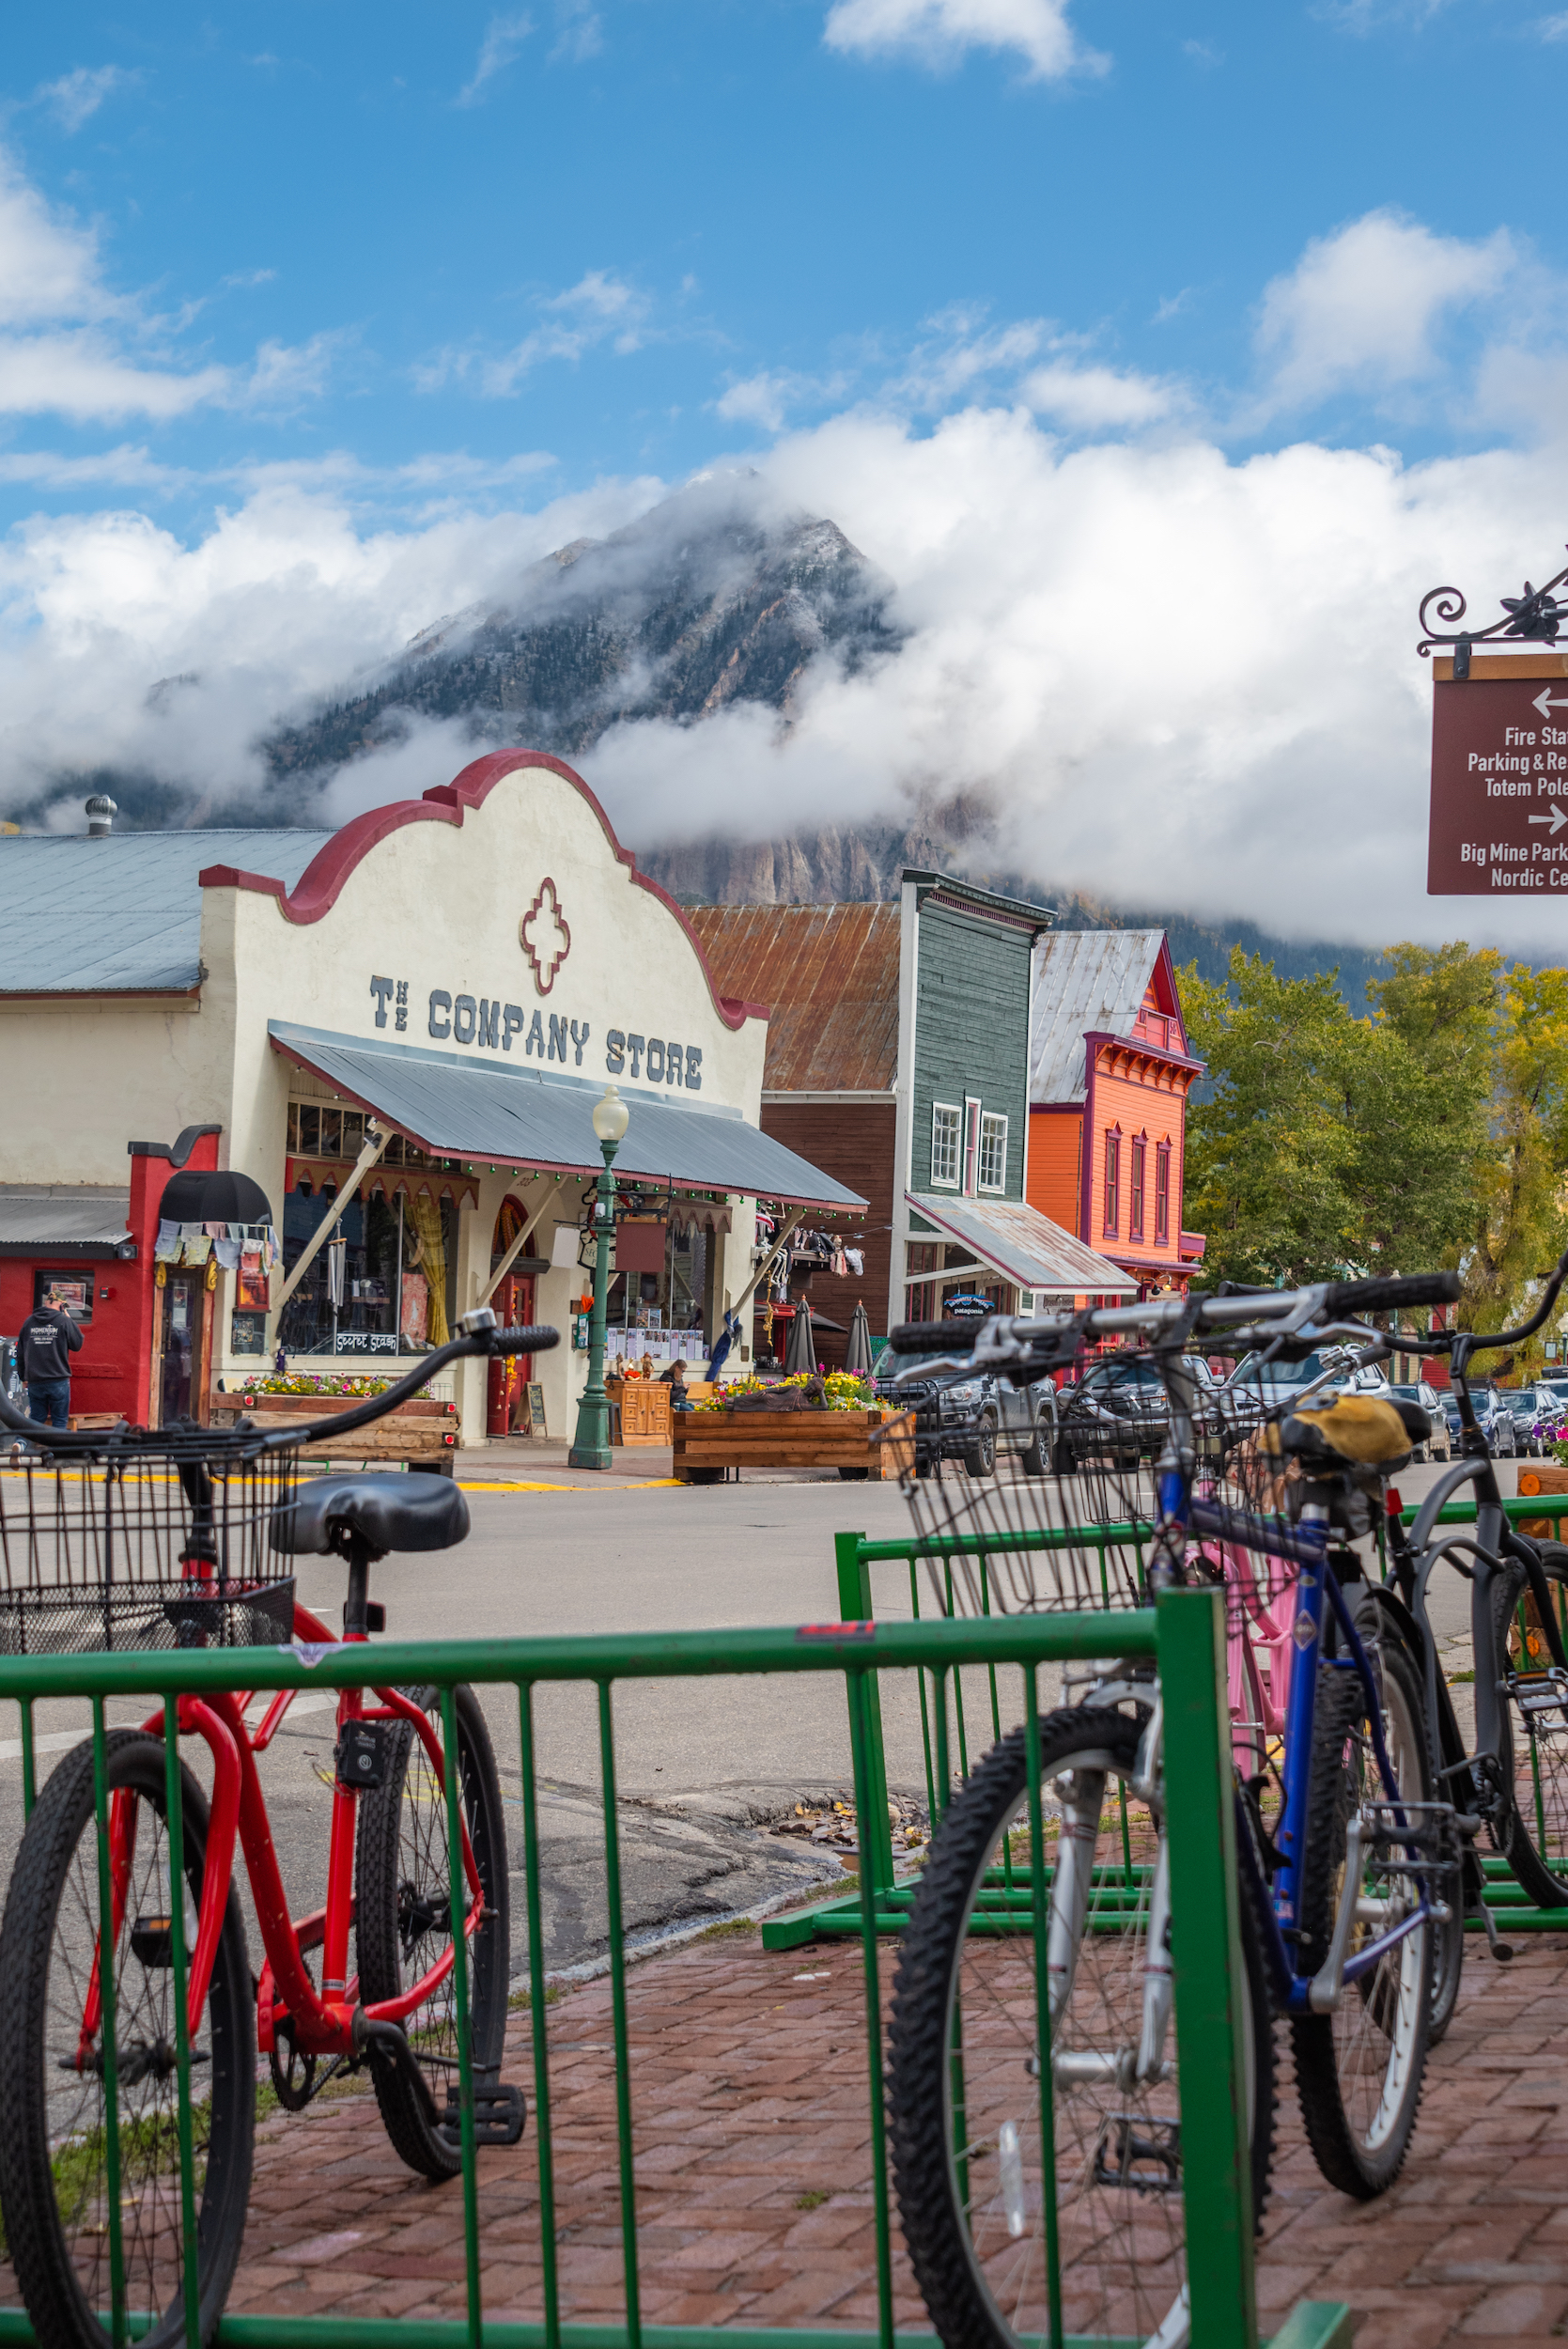 a downtown view of crested butte, co with a mountain peal shrouded by clouds in the background